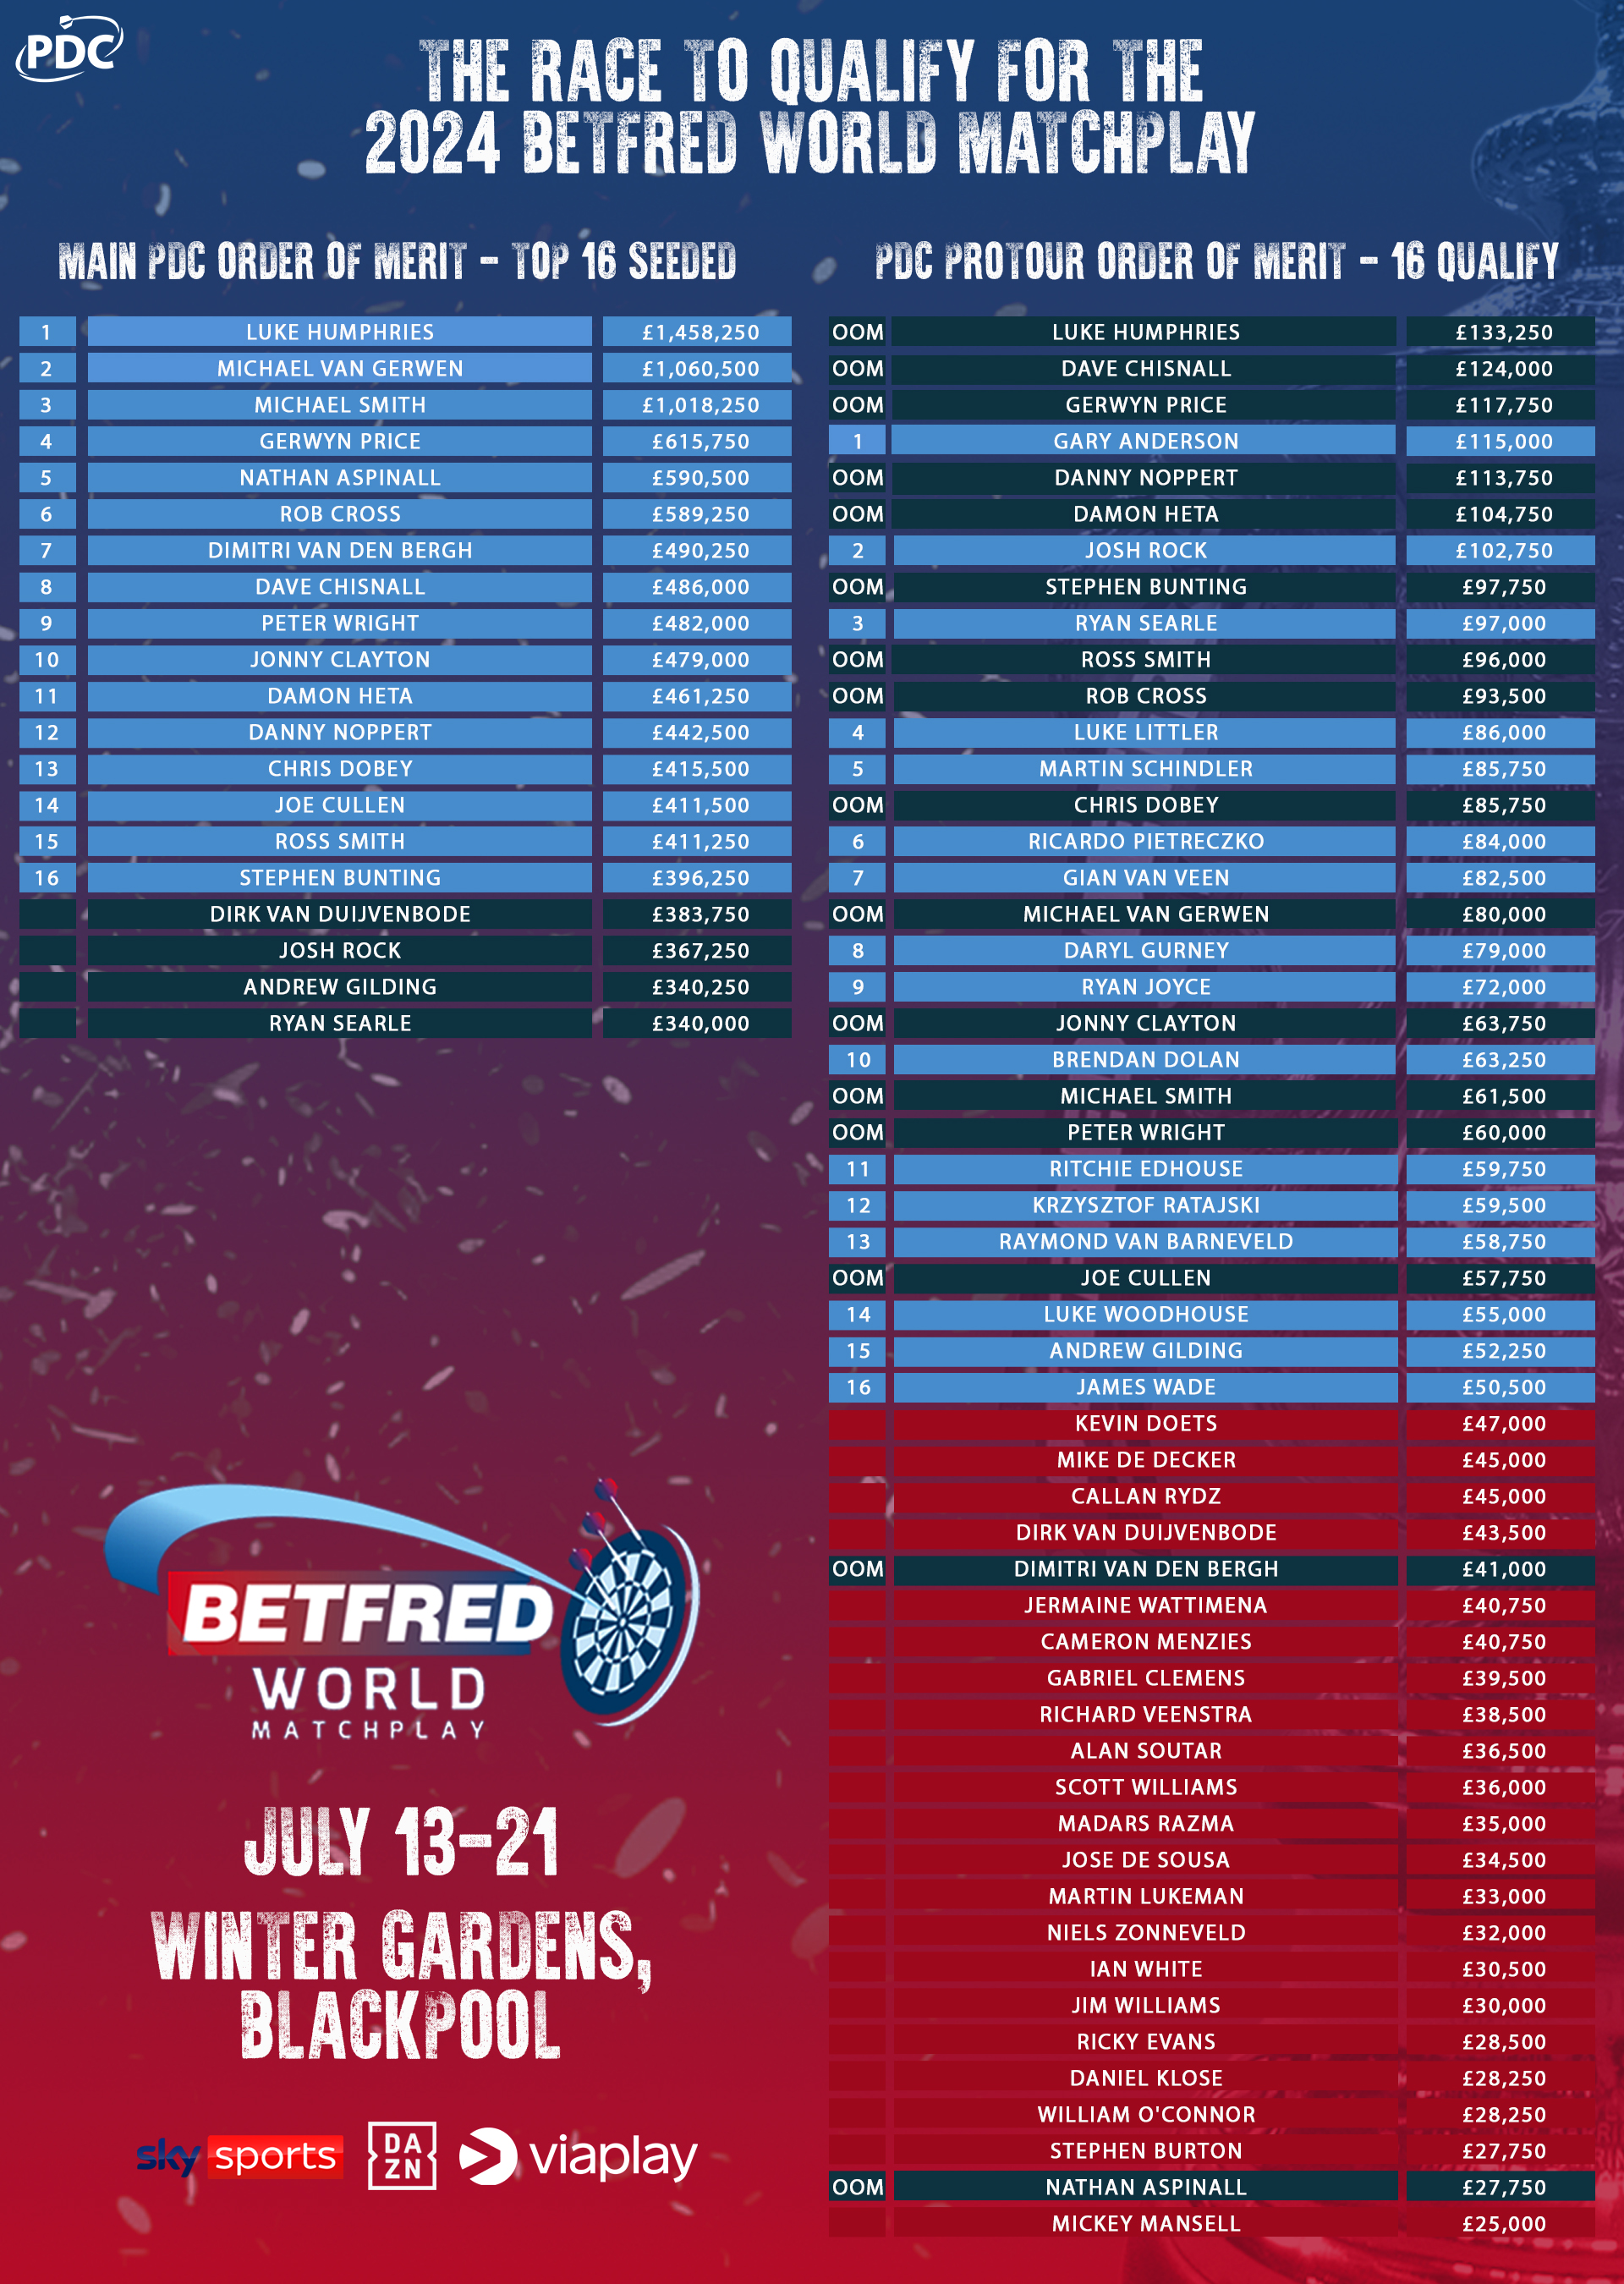 2024 Betfred World Matchplay qualification race